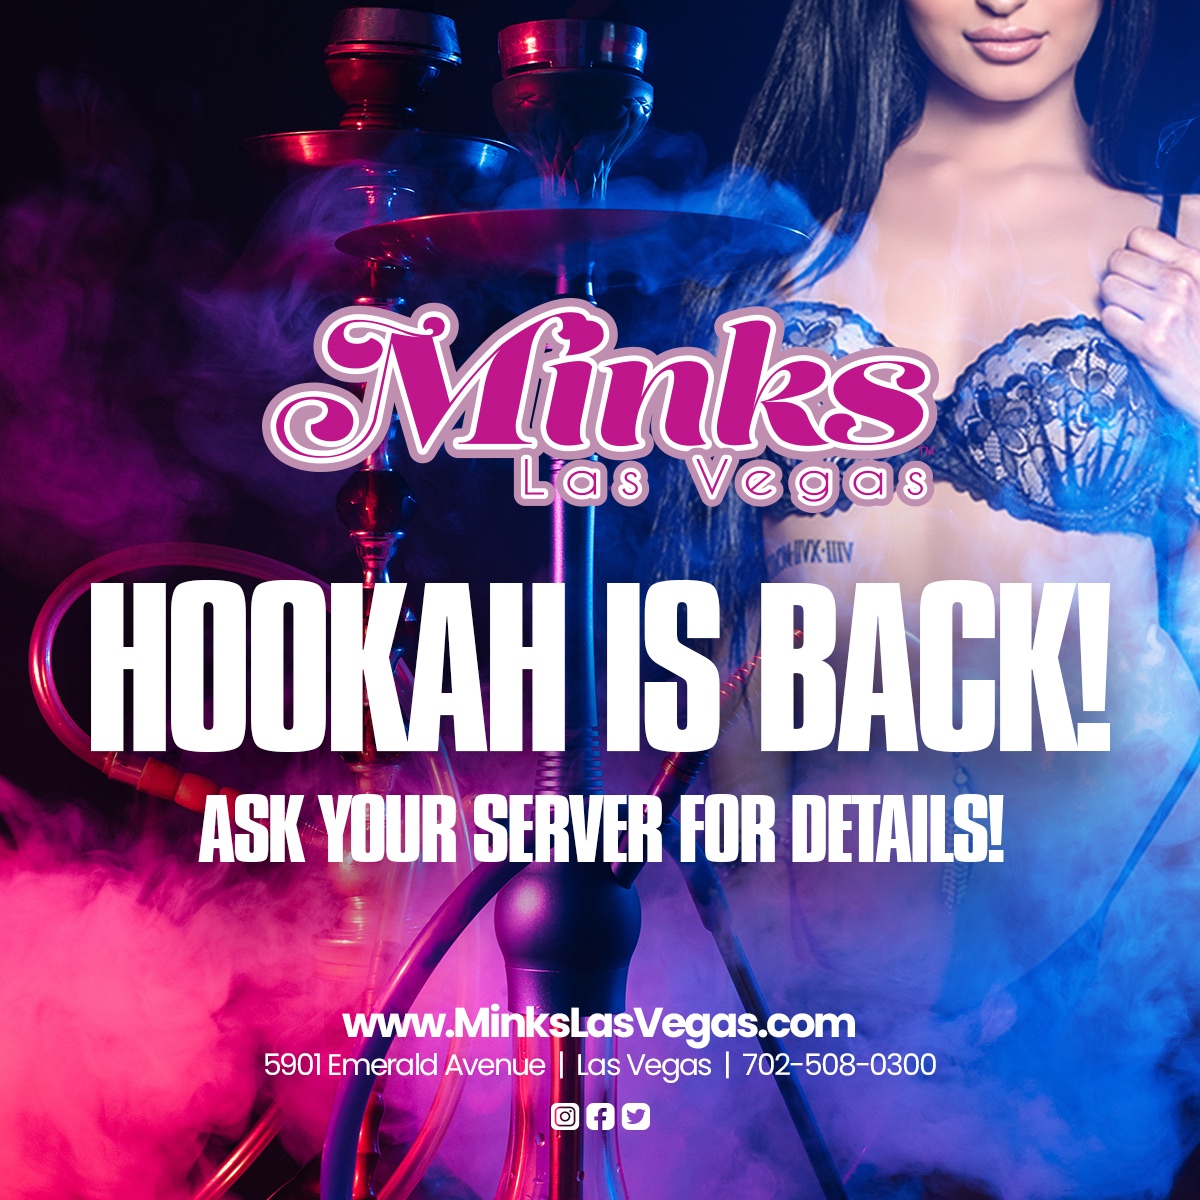 💨 Hookah is back at Minks! 💨 Come enjoy a relaxing evening with friends and great food while puffing on a hookah. 🤩 Ask your server for details. #hookah #relaxation #minksrestaurant 🤗